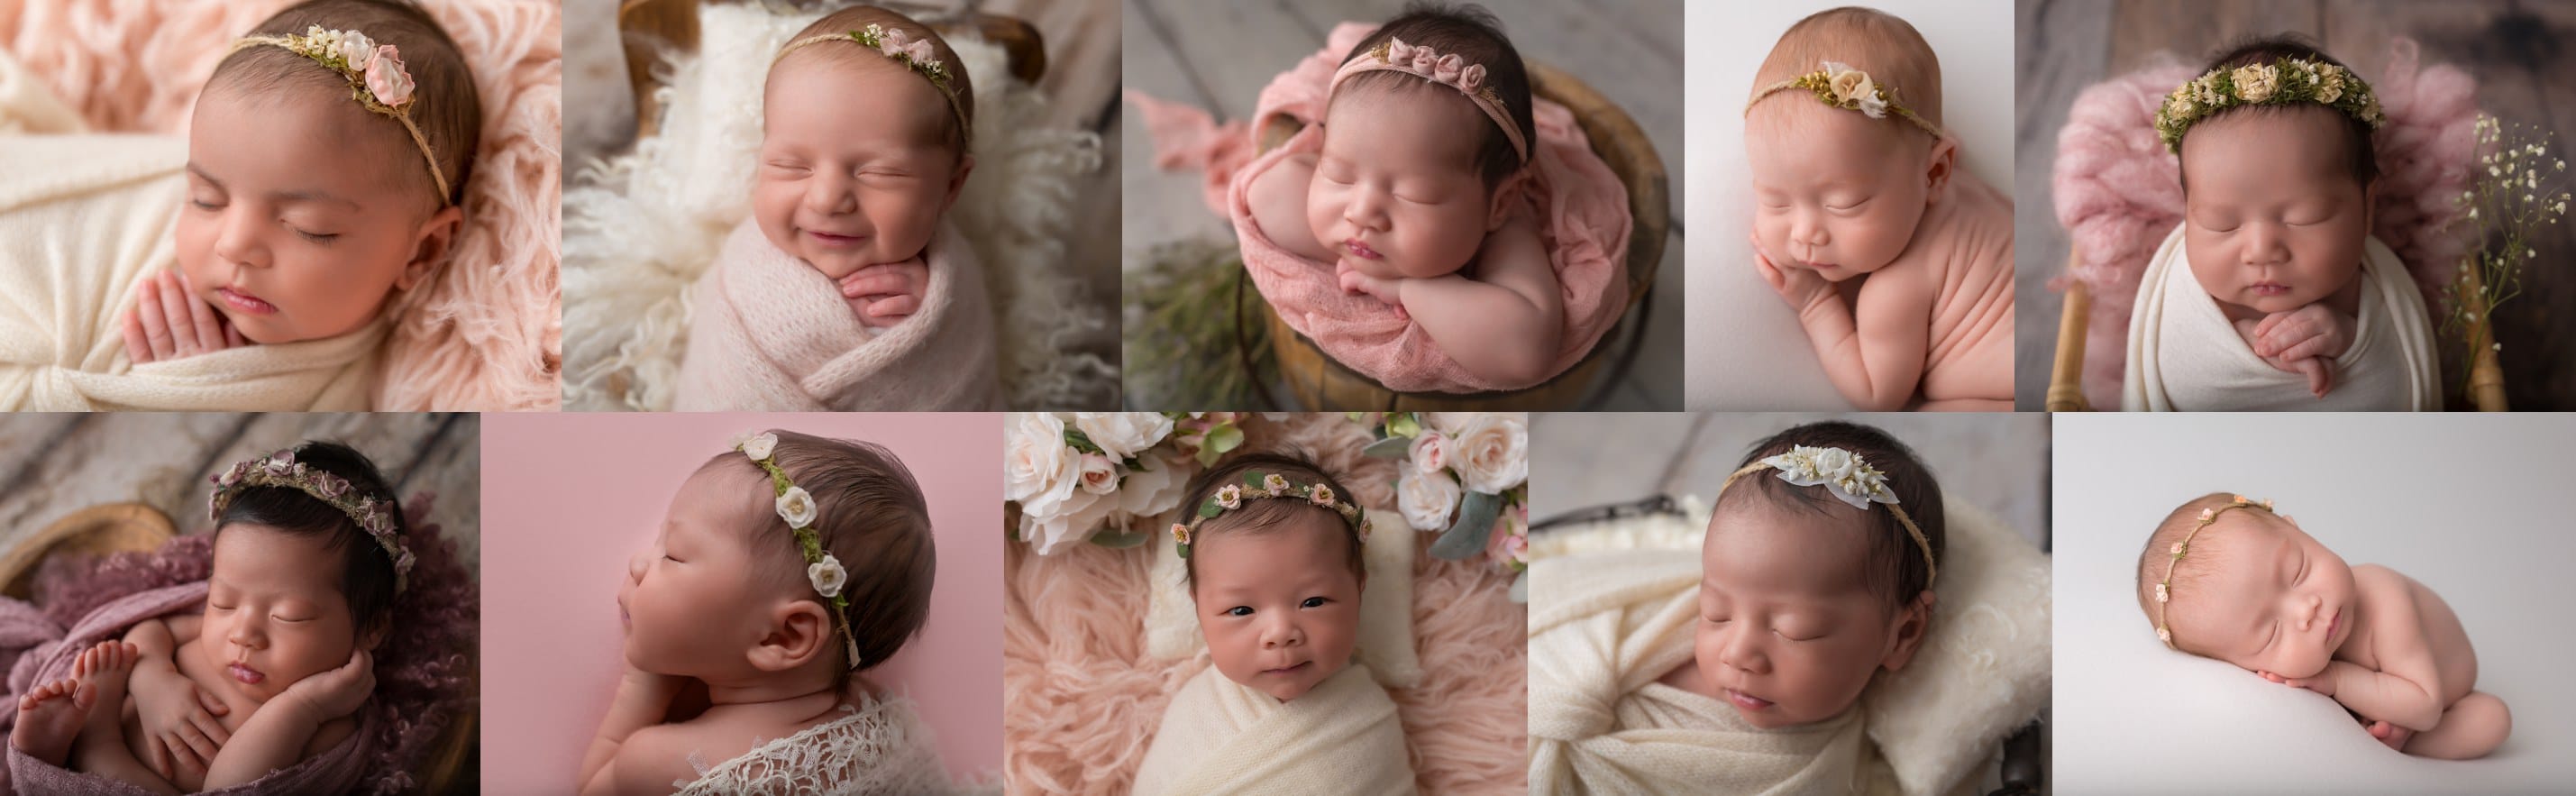 Collage of baby girl newborn photography close ups